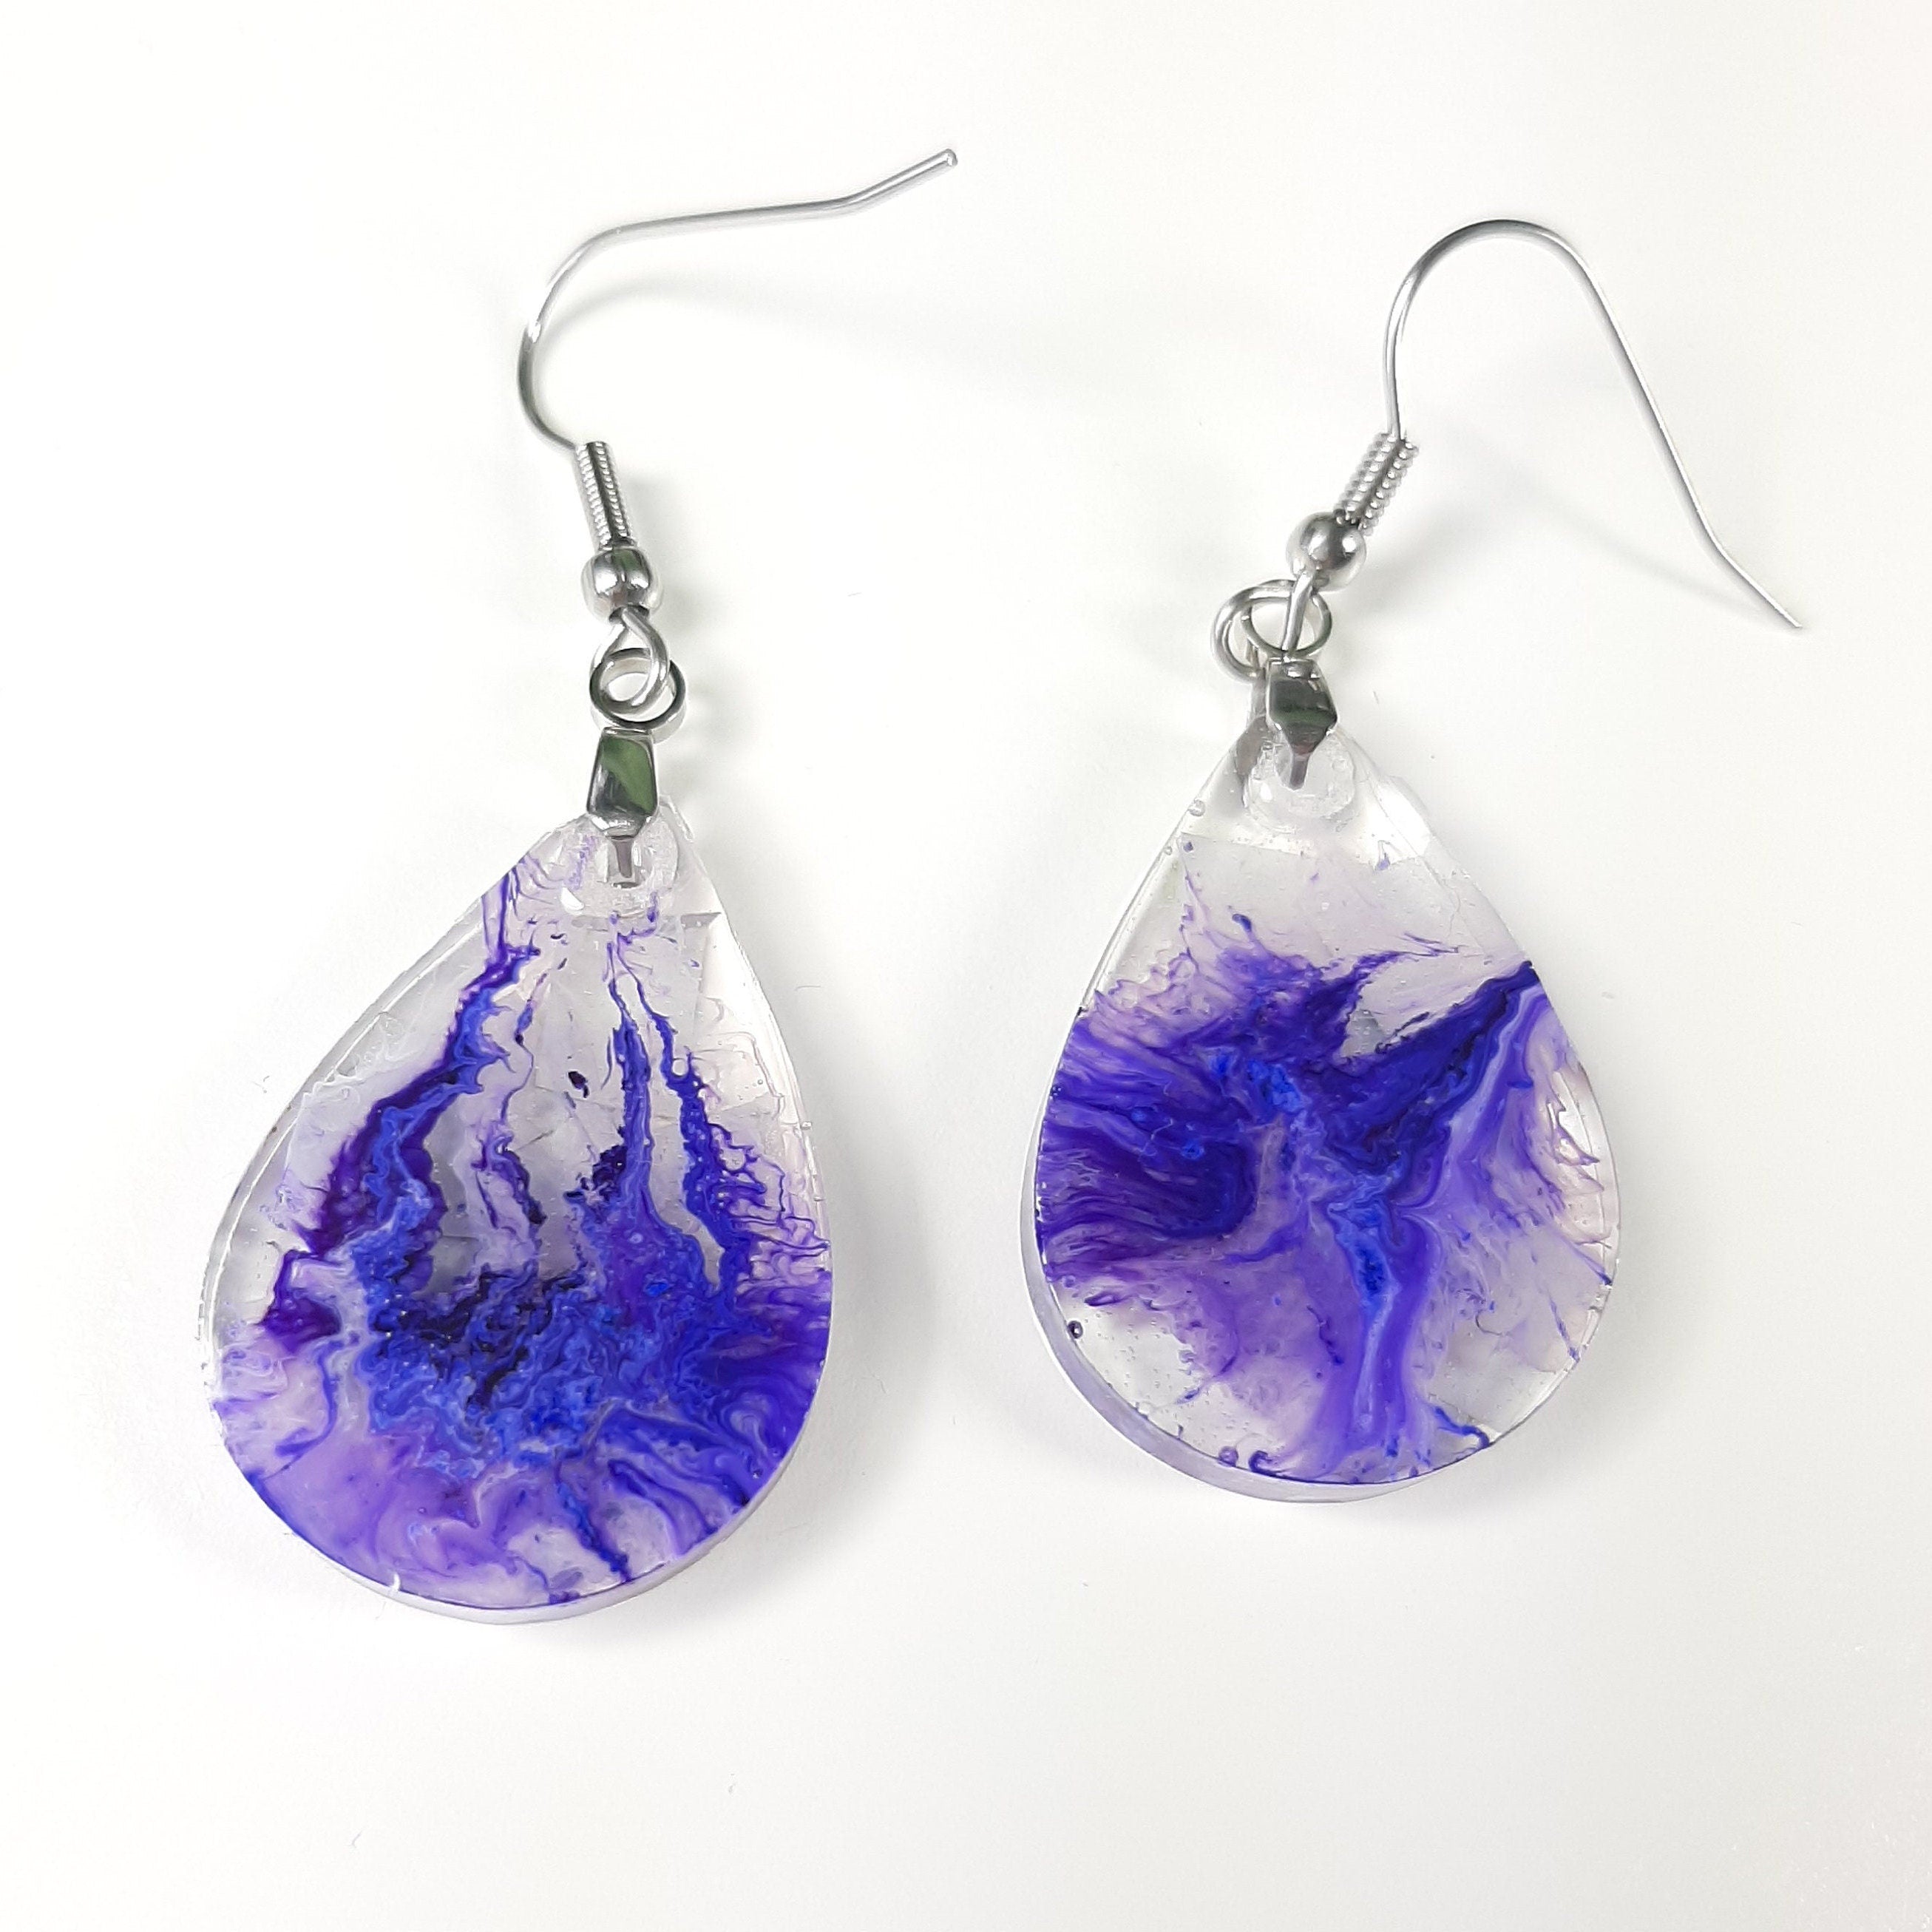 Upcycled Plastic, Resin and Alcohol Ink Earrings